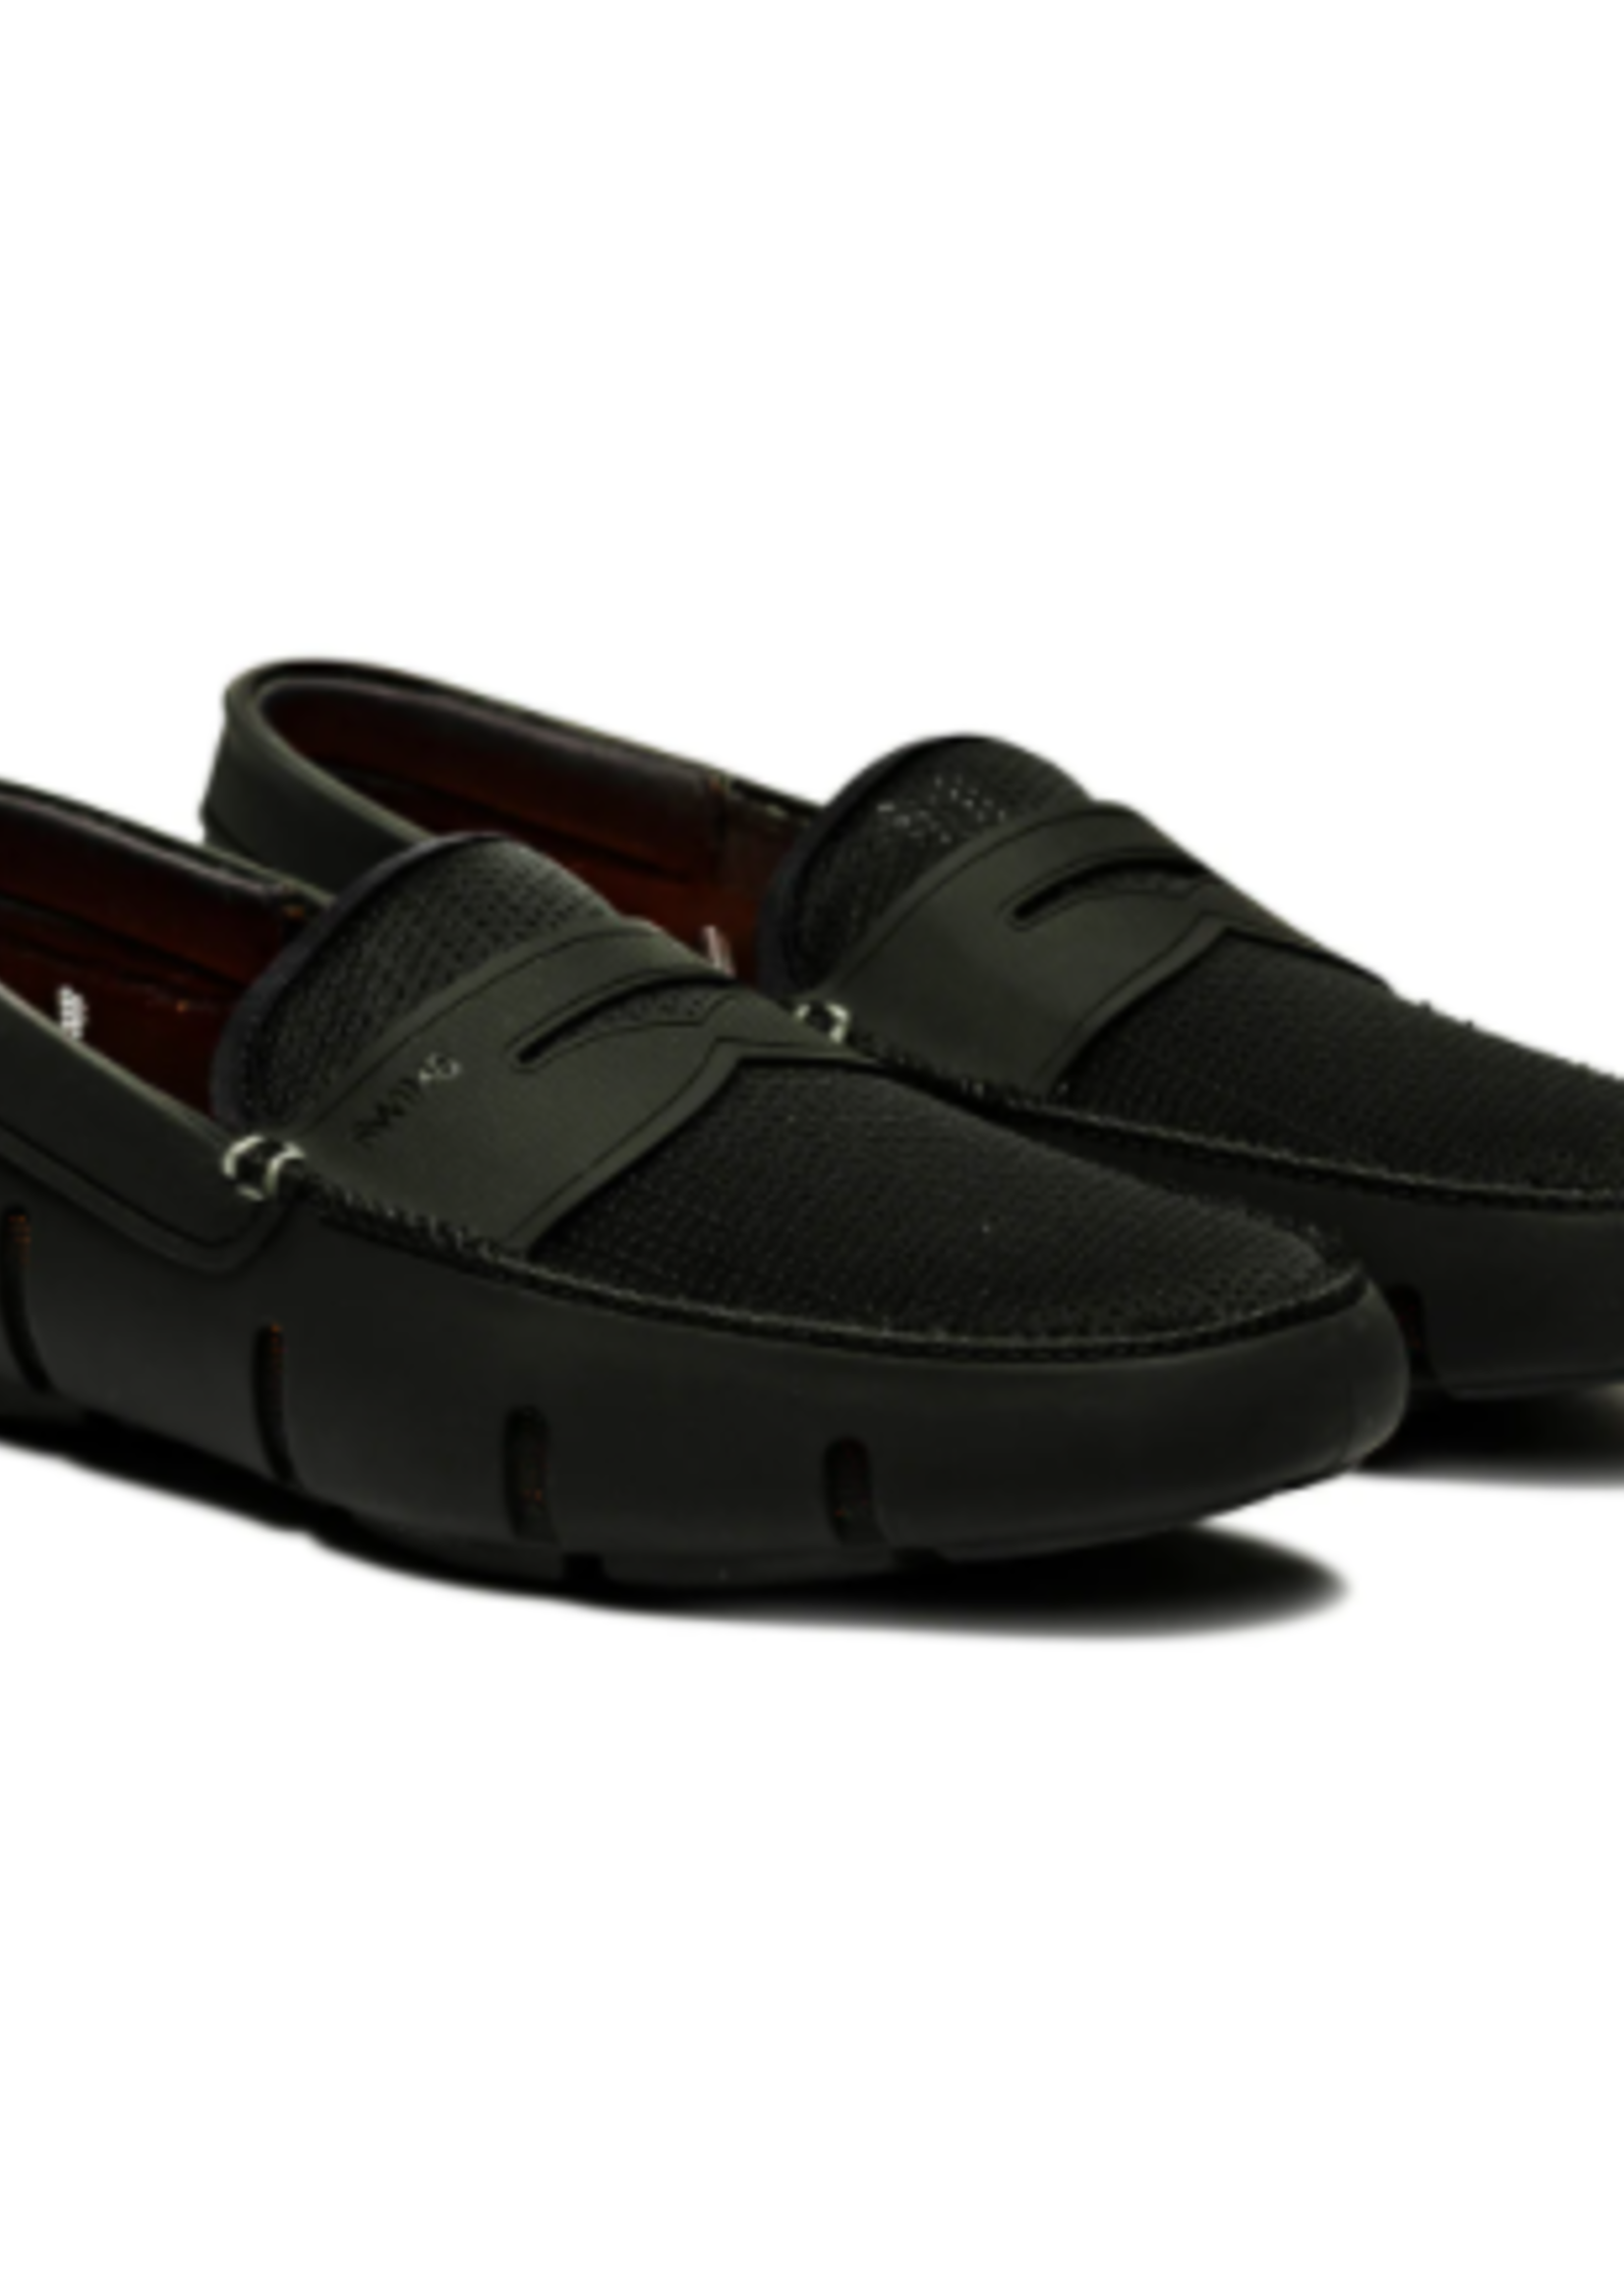 SWIMS PENNY LOAFER - BLACK